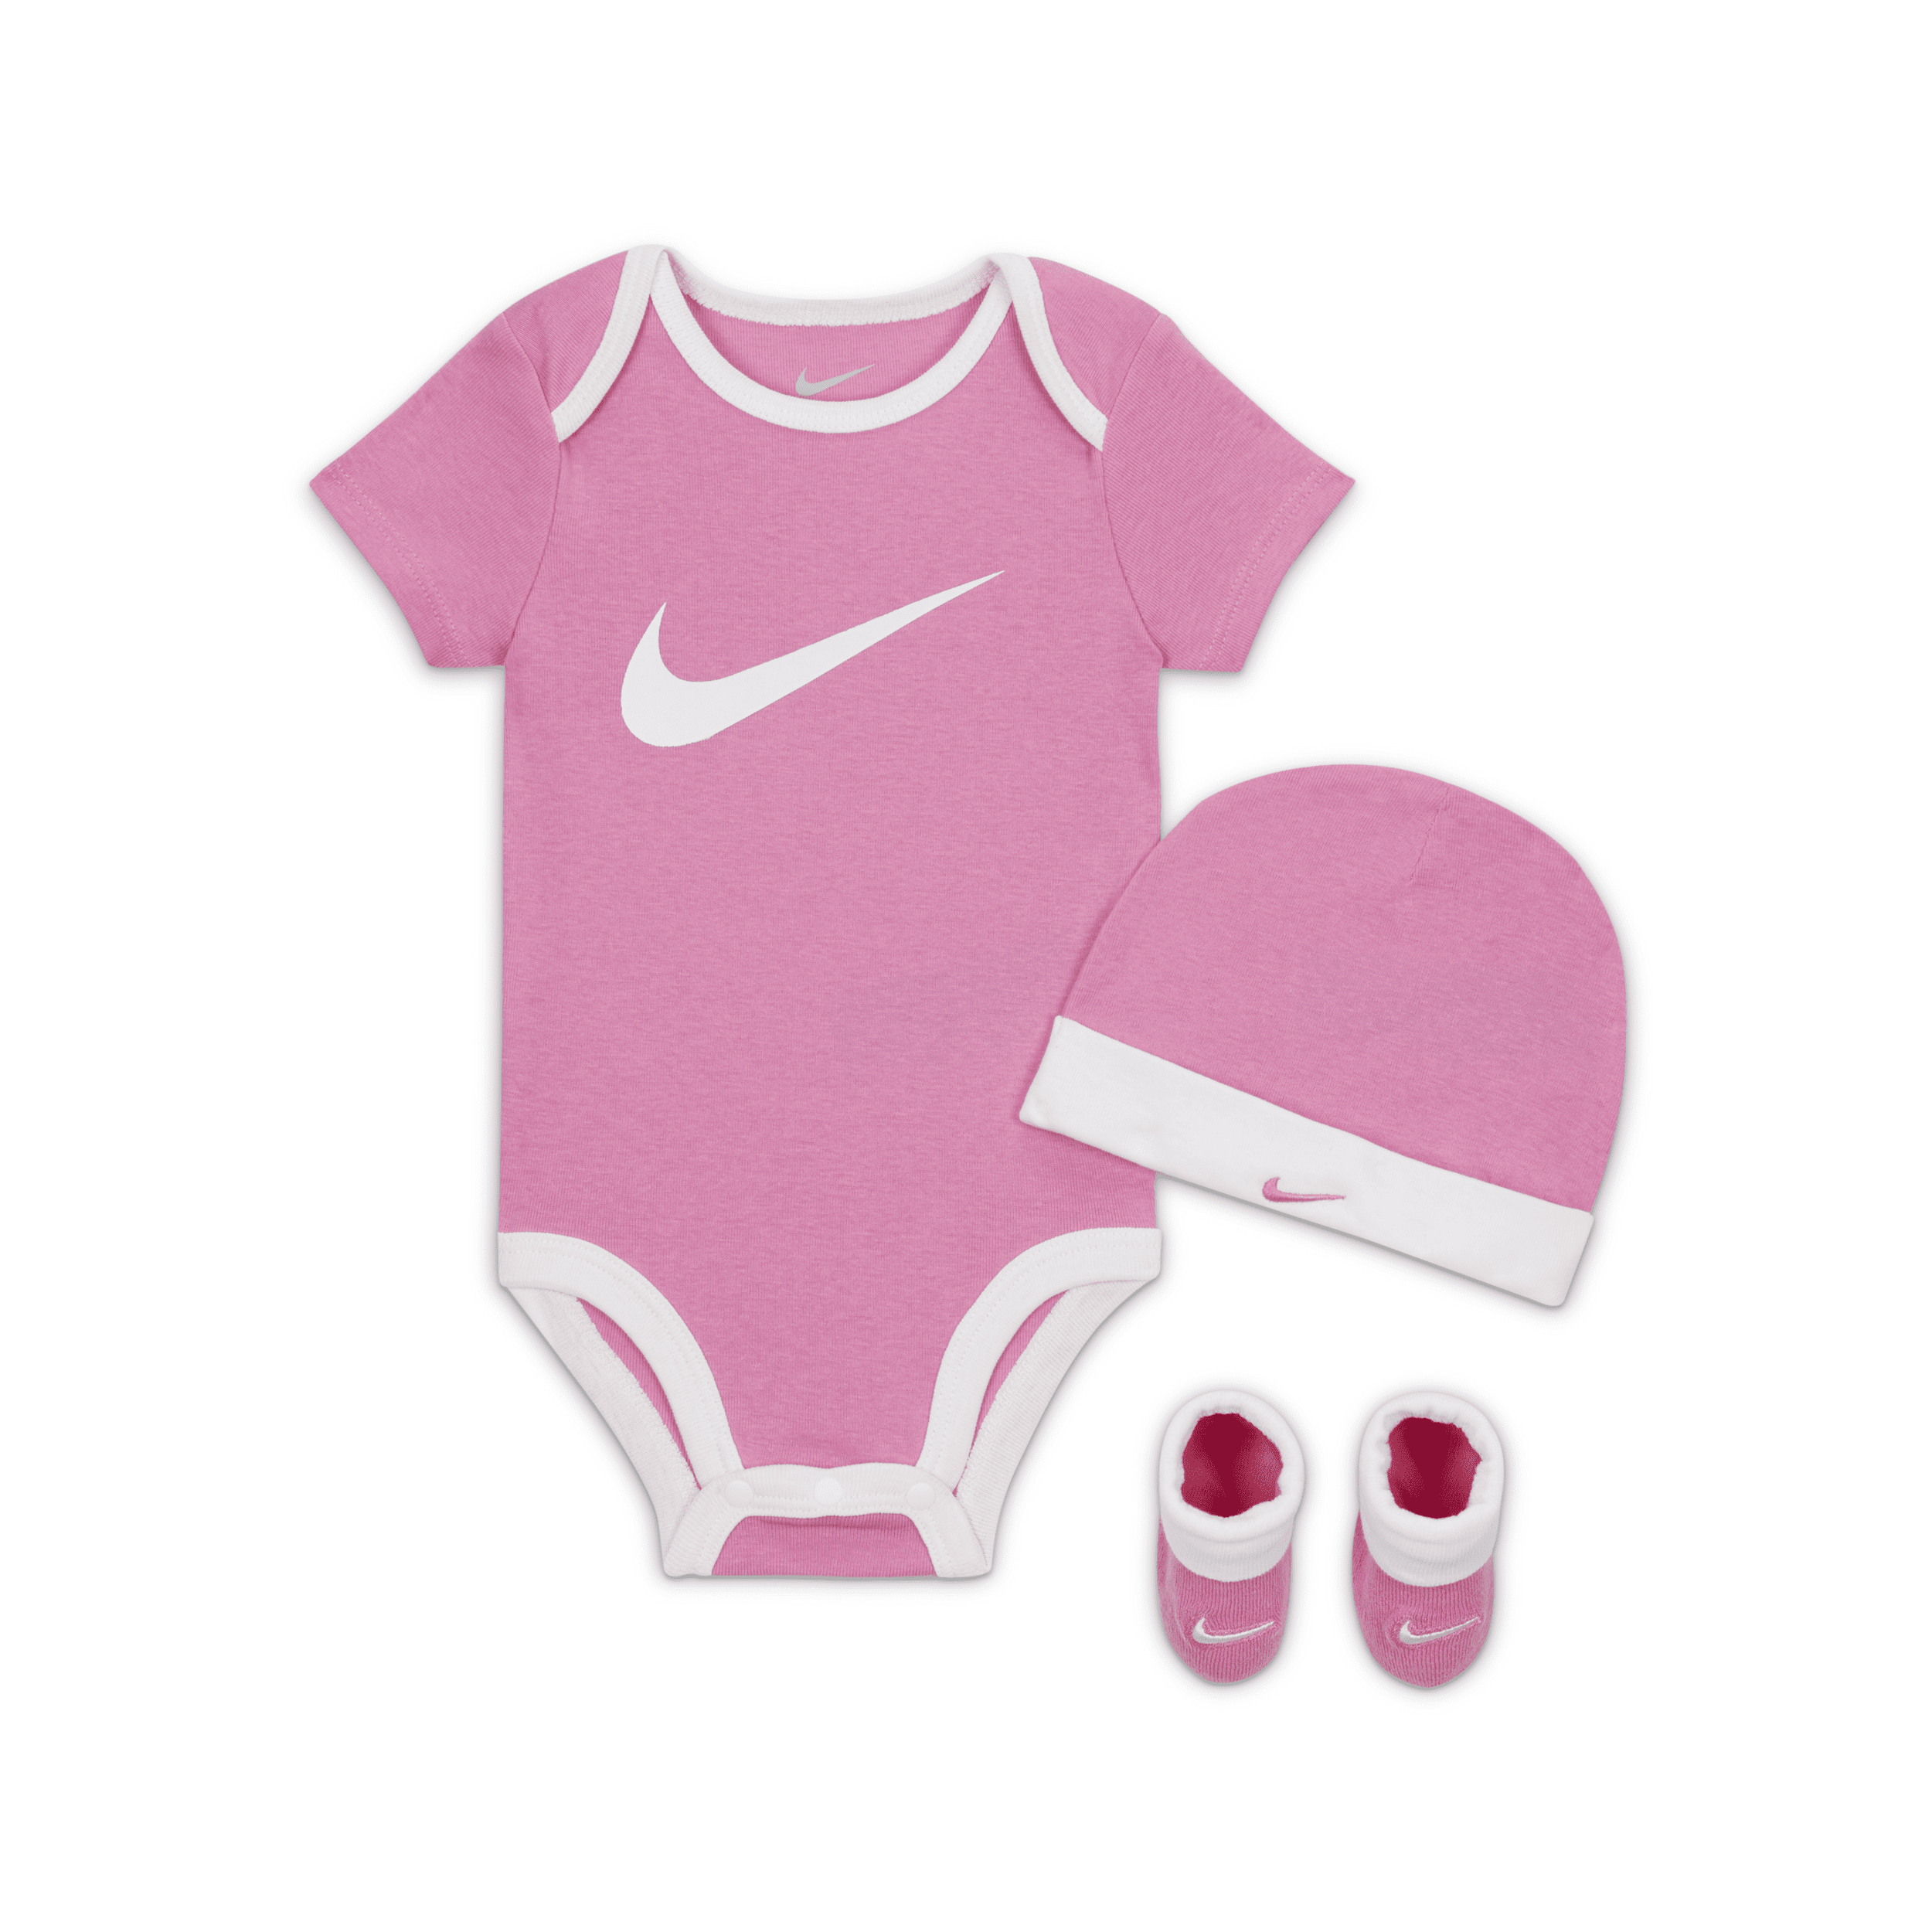 Nike Baby (0-6m) Bodysuit, Hat And Booties Box Set In Pink